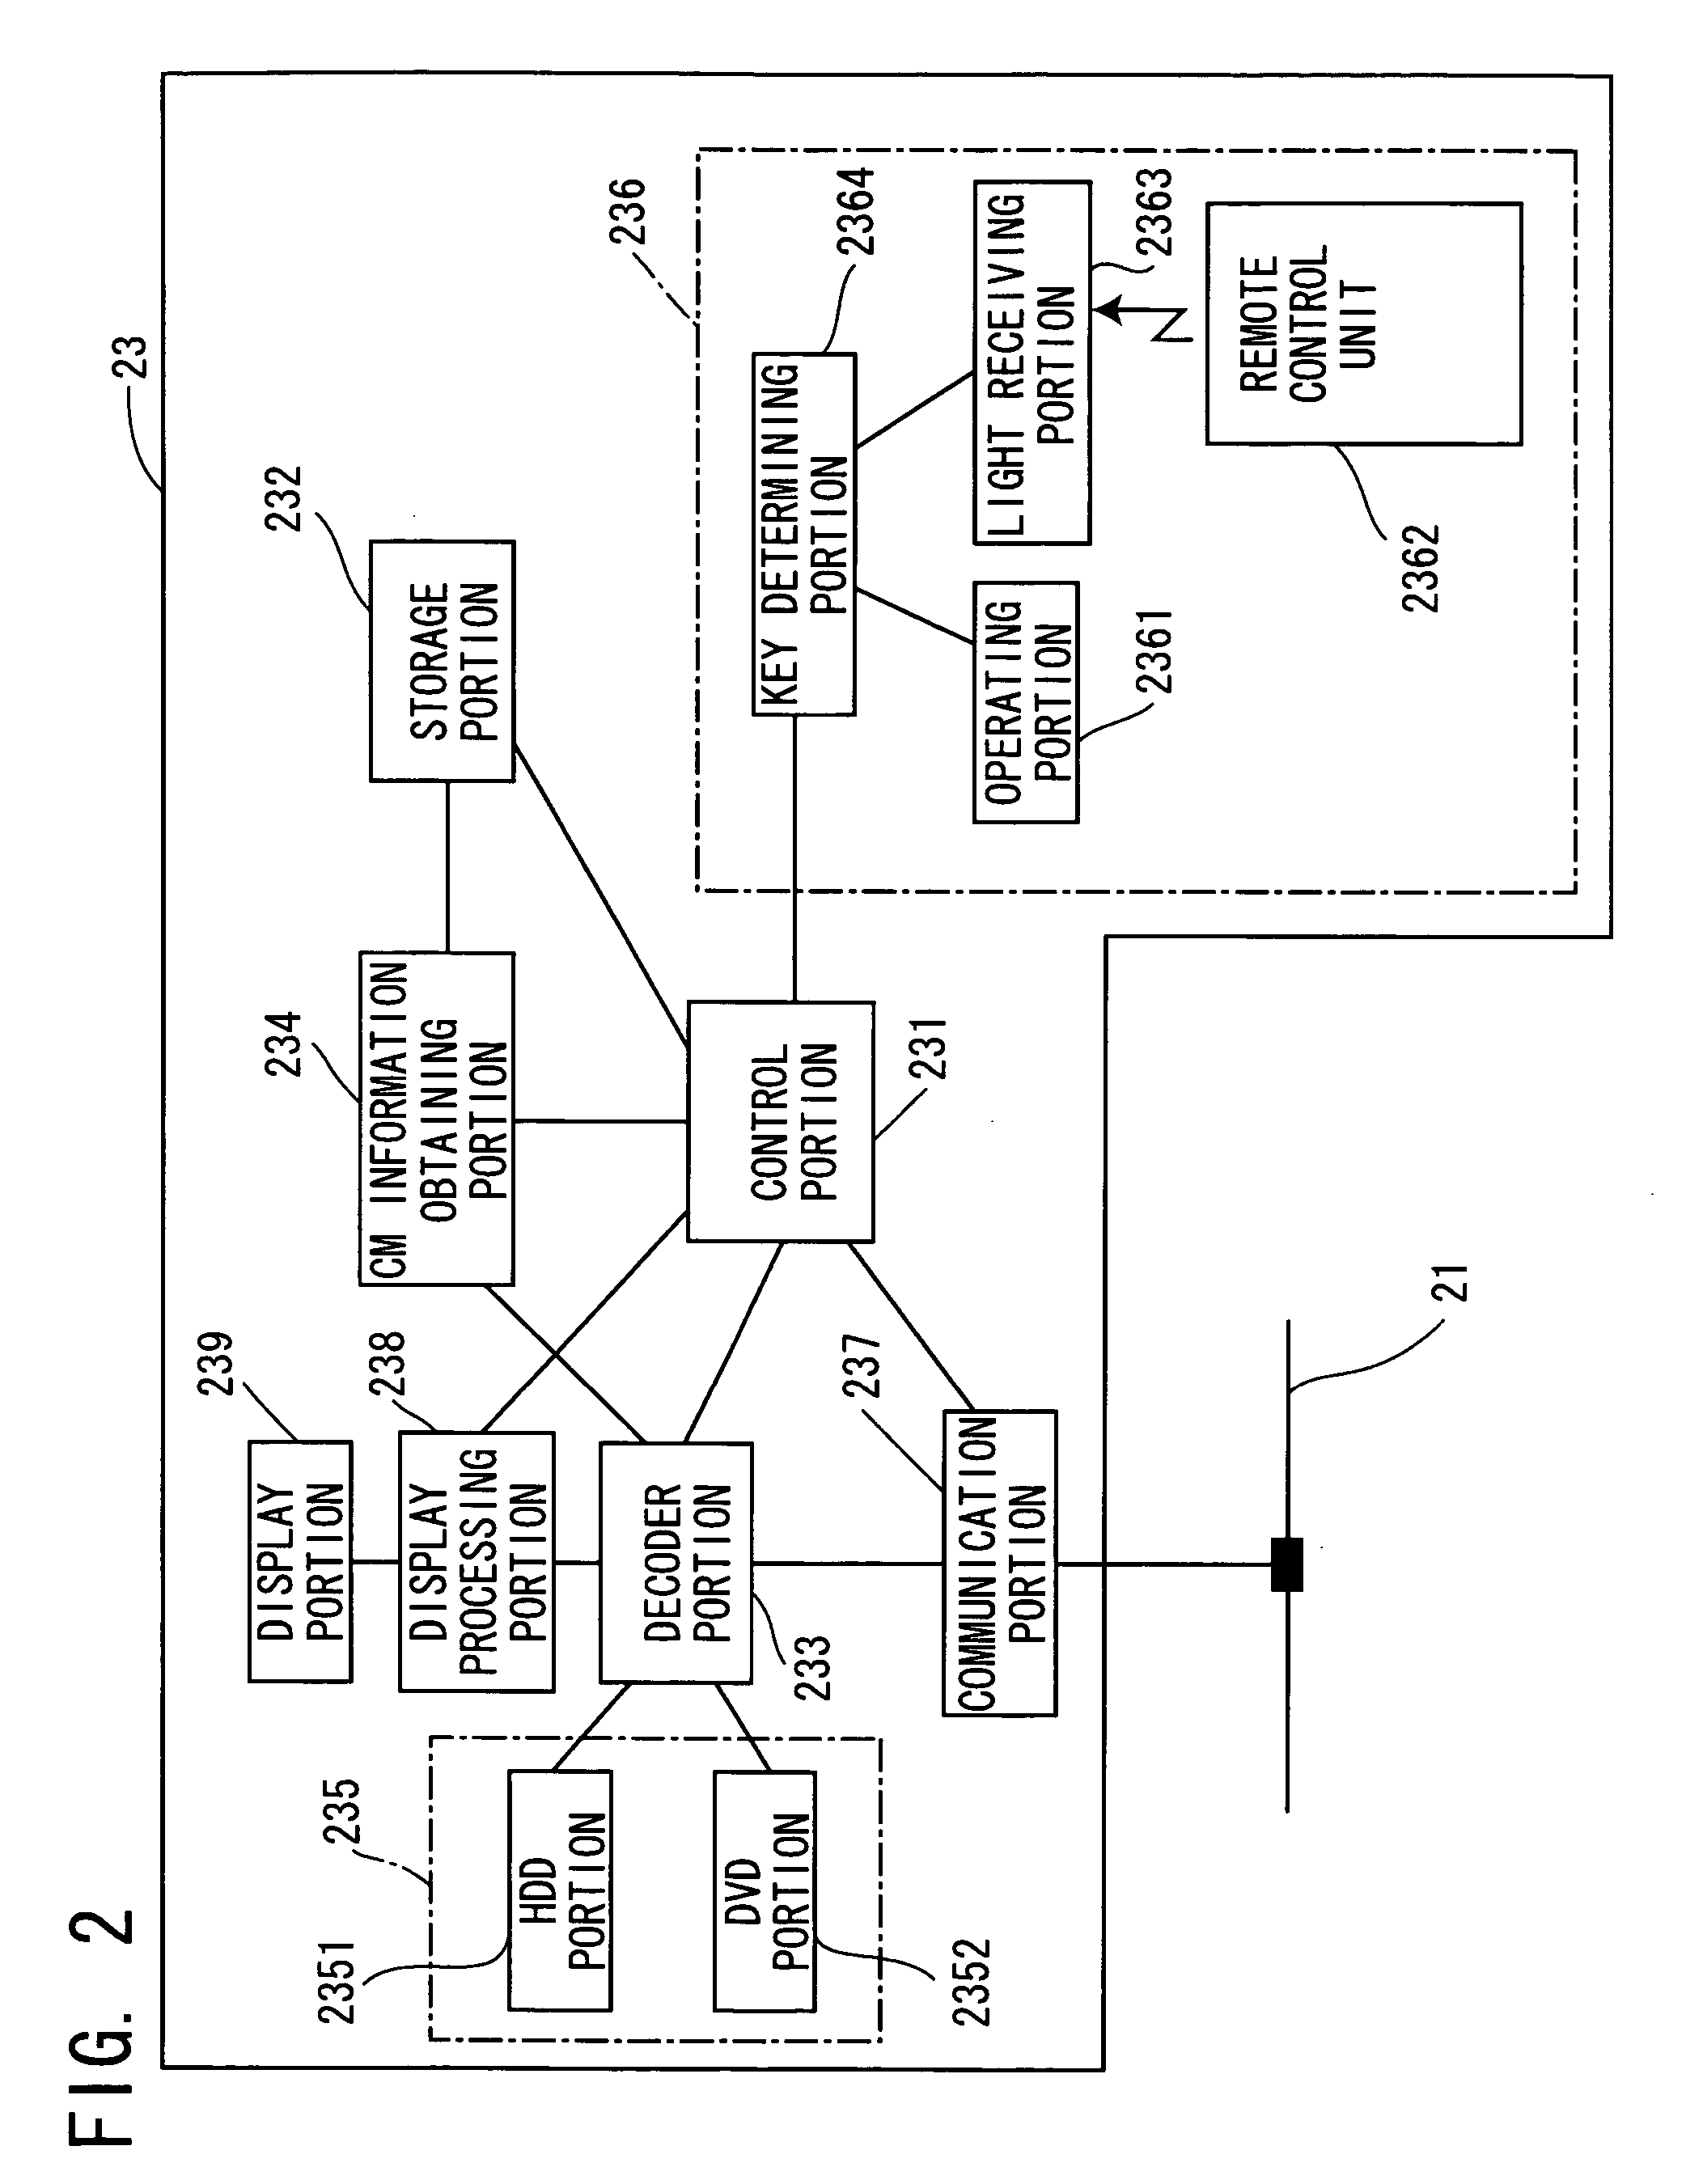 Content receiving, recording and reproducing device and content distribution system